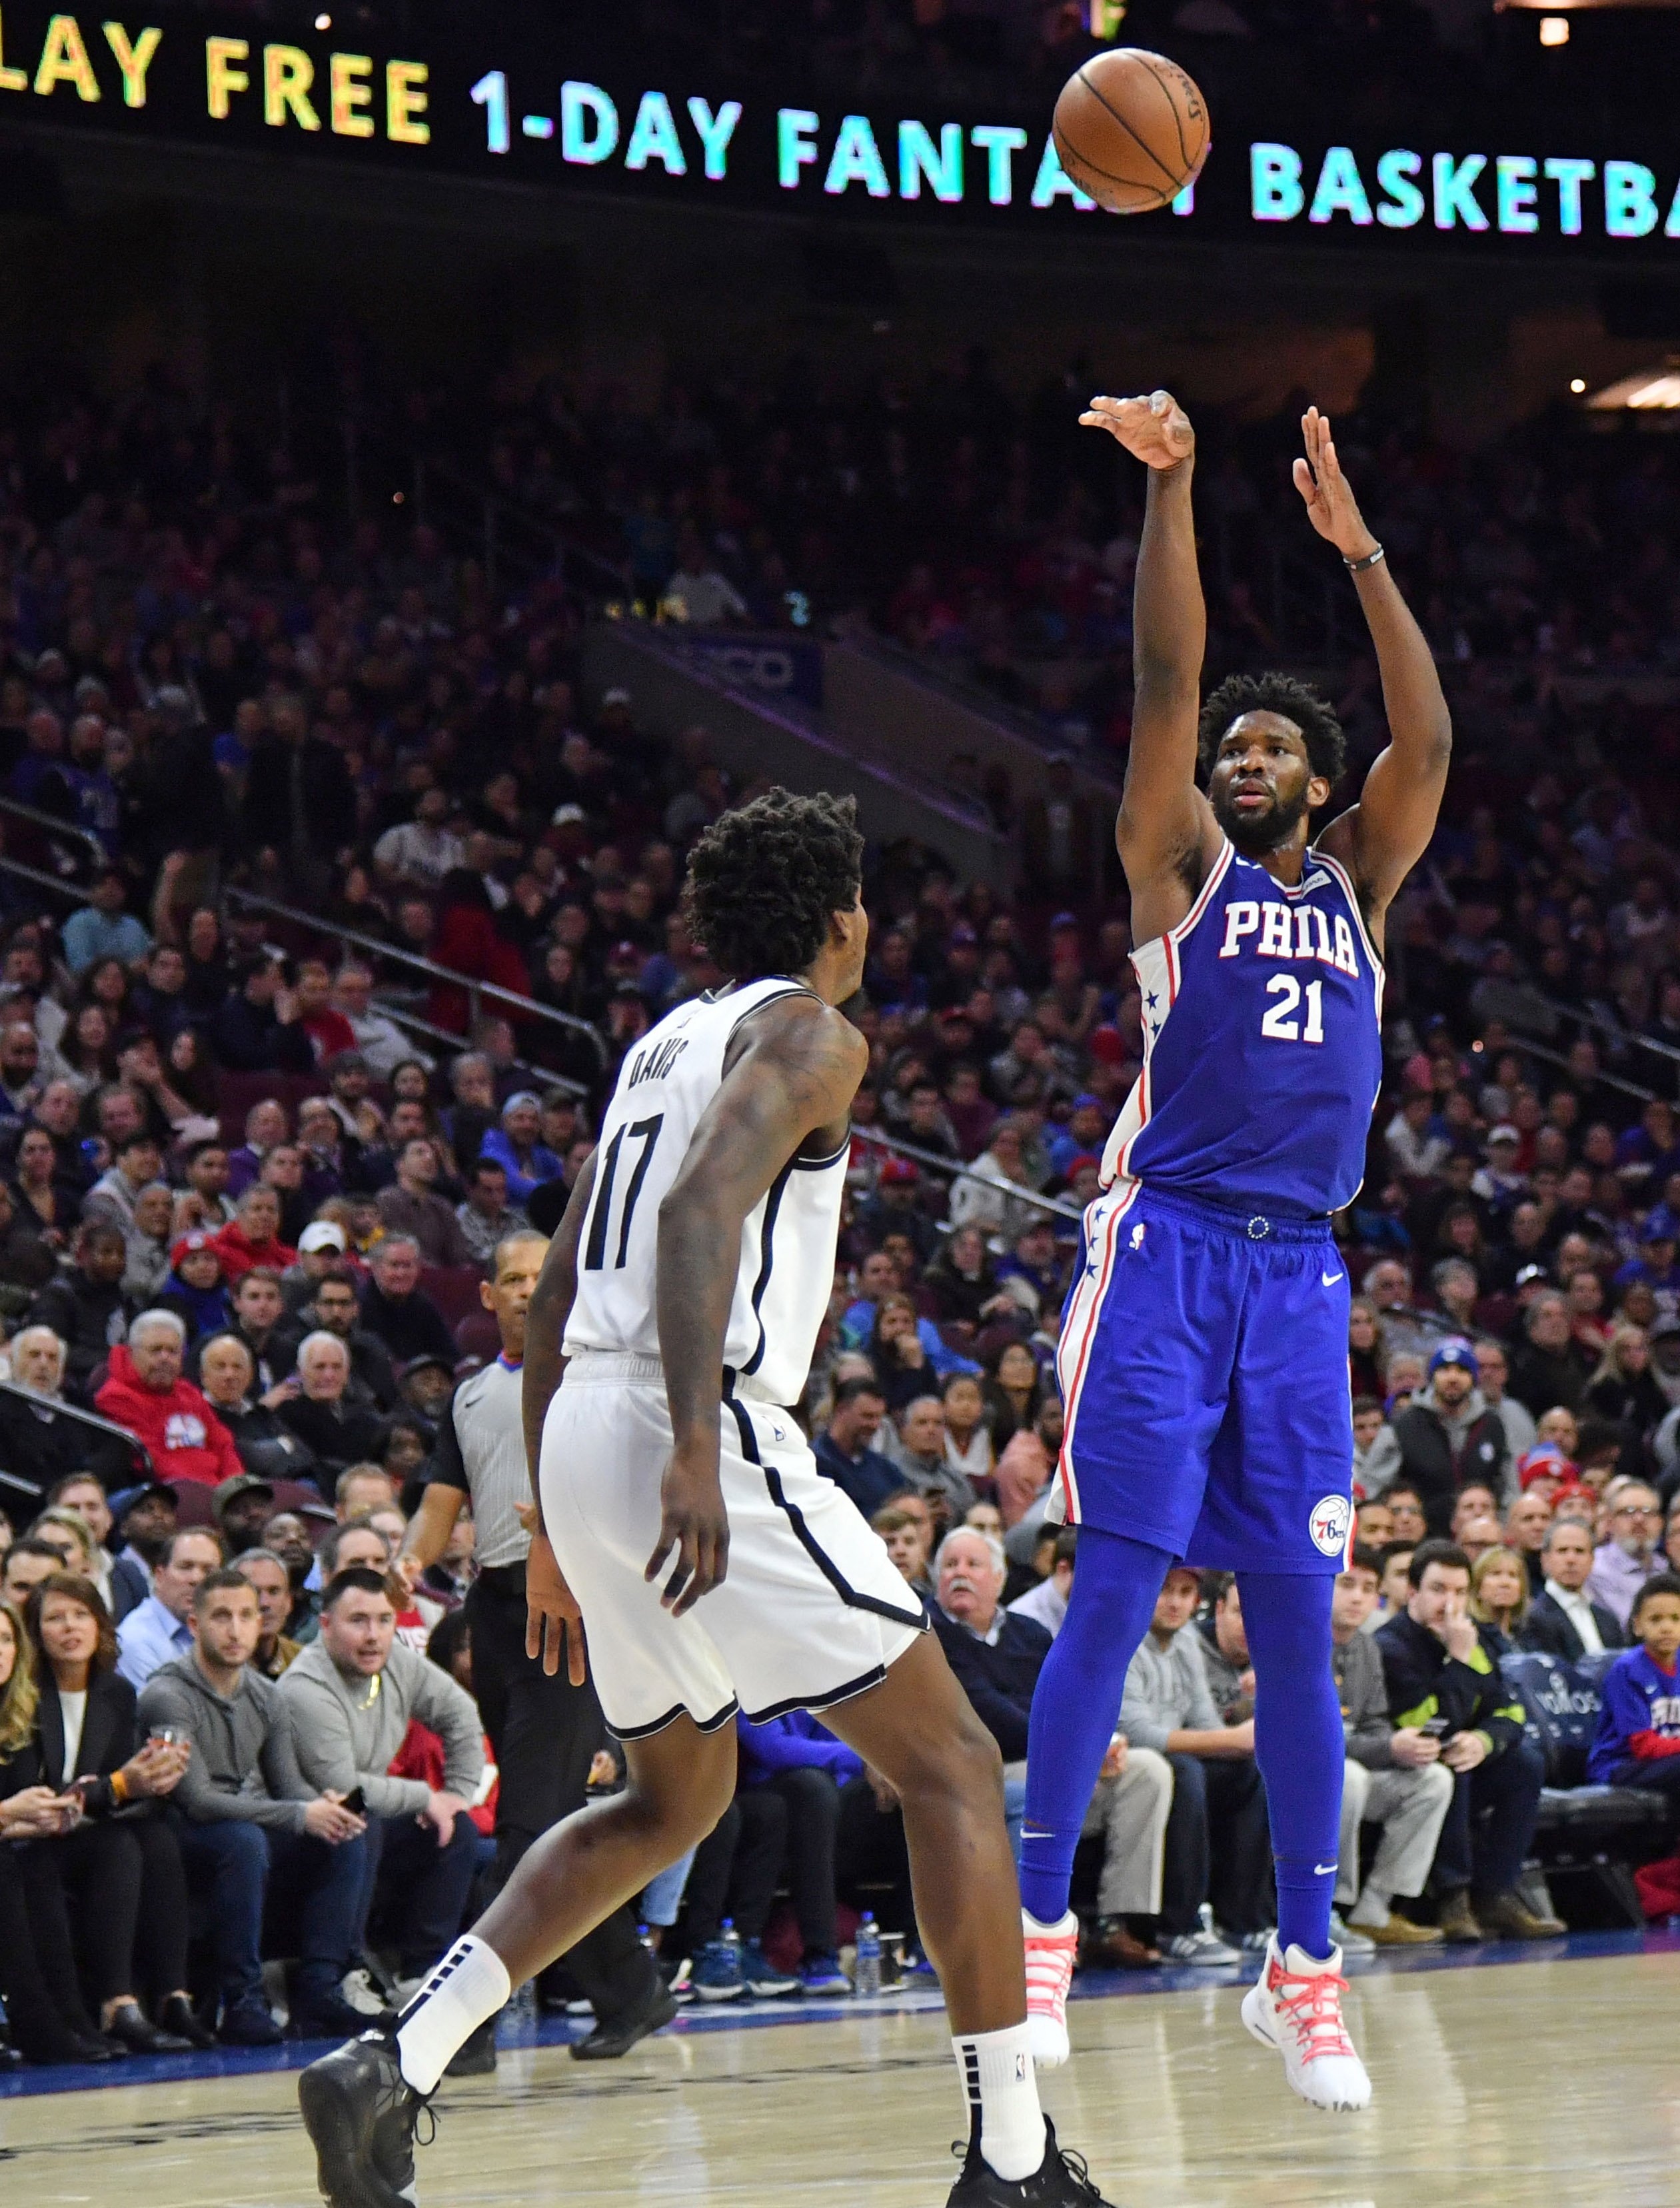 “I Only Do it Because of the Spacing that We Have” – On Joel Embiid and Three-Point Shooting